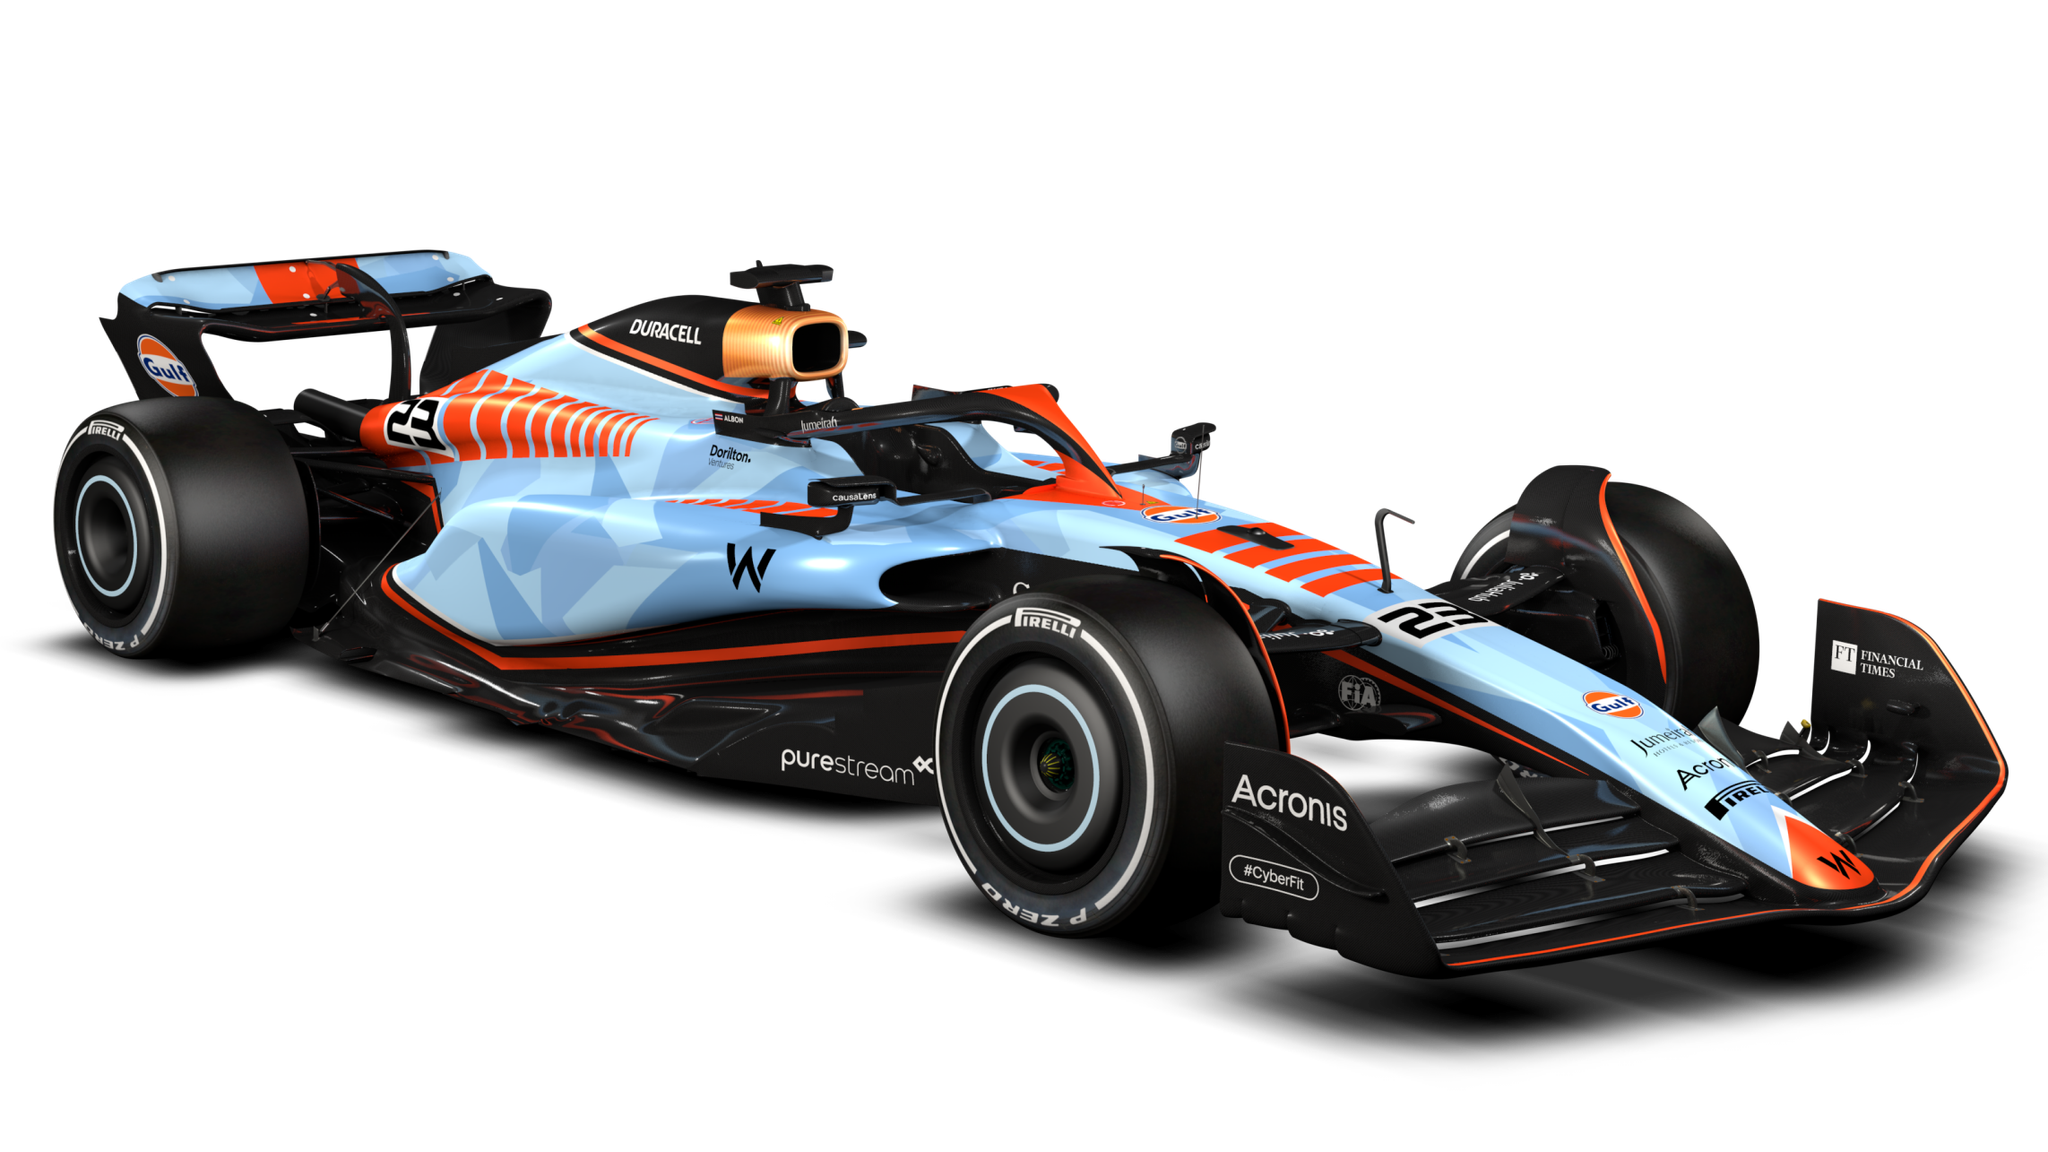 Williams reveal special Gulf livery for Singapore, Japan and Qatar races later in Formula 1 season F1 News